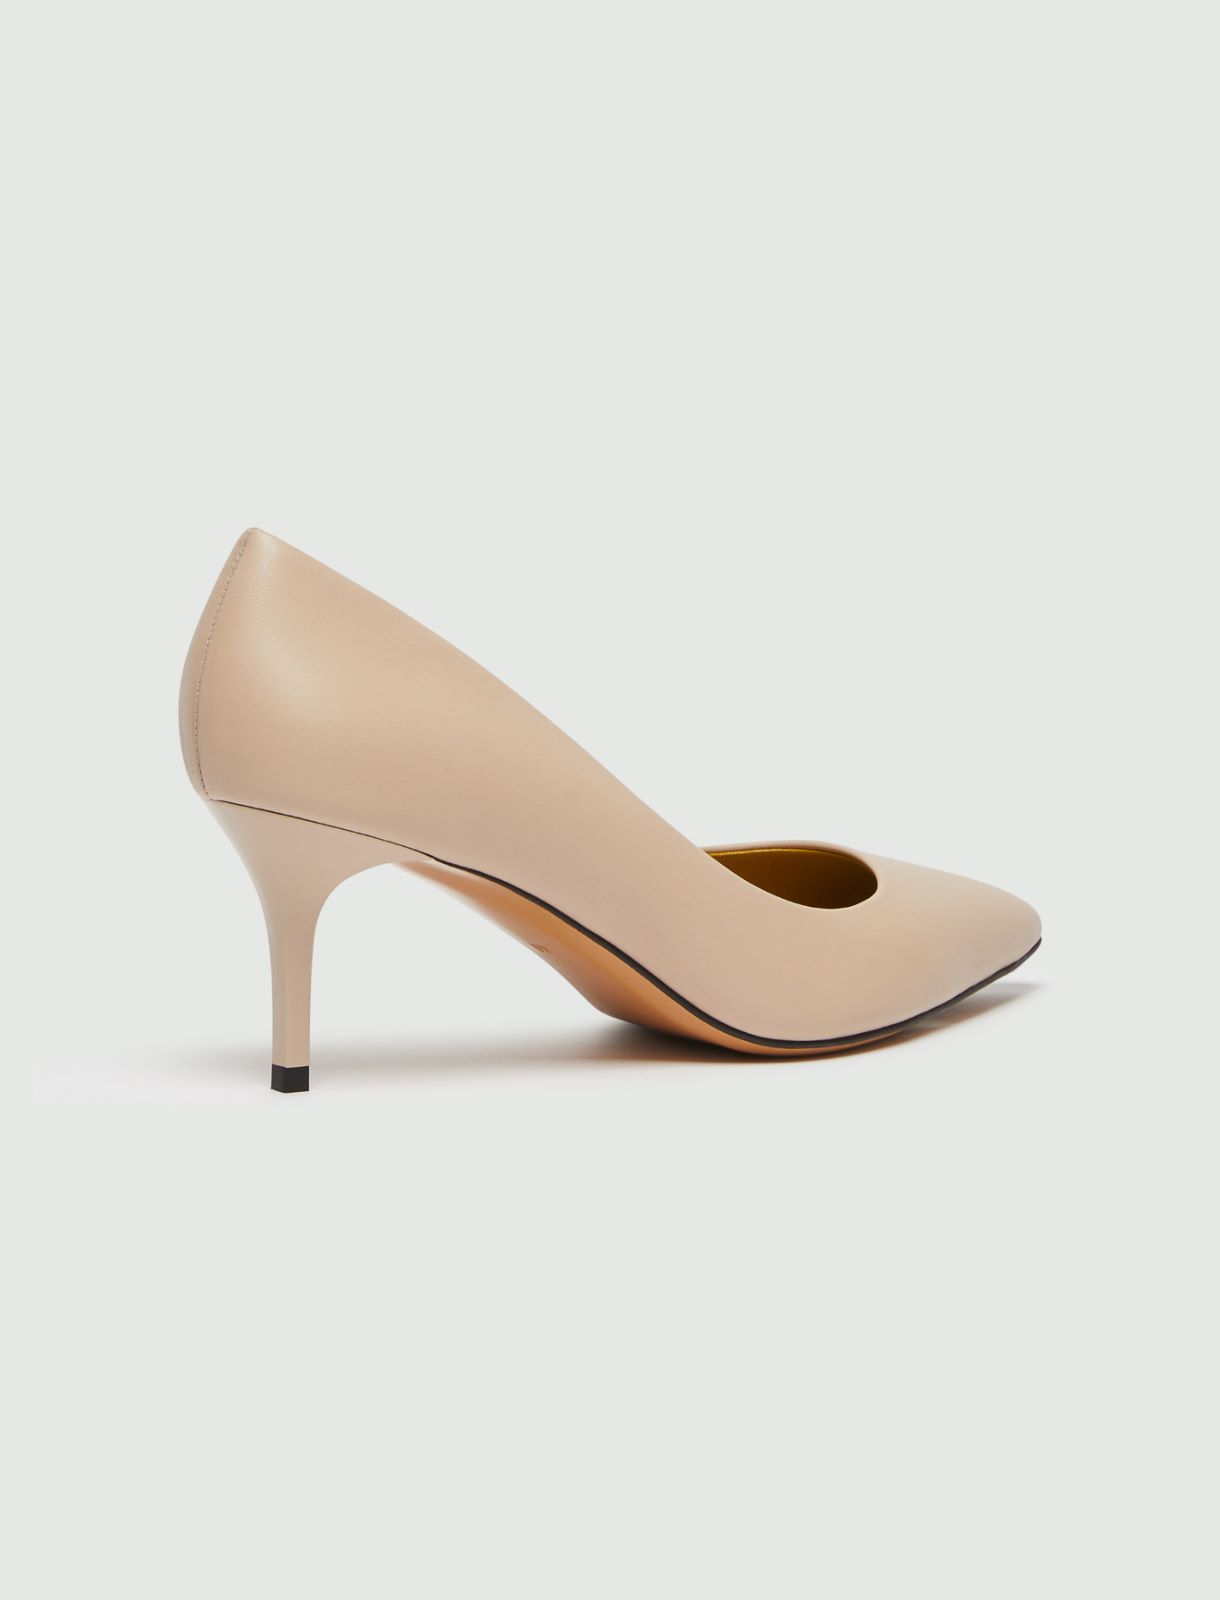 Leather court shoes, beige | Marella